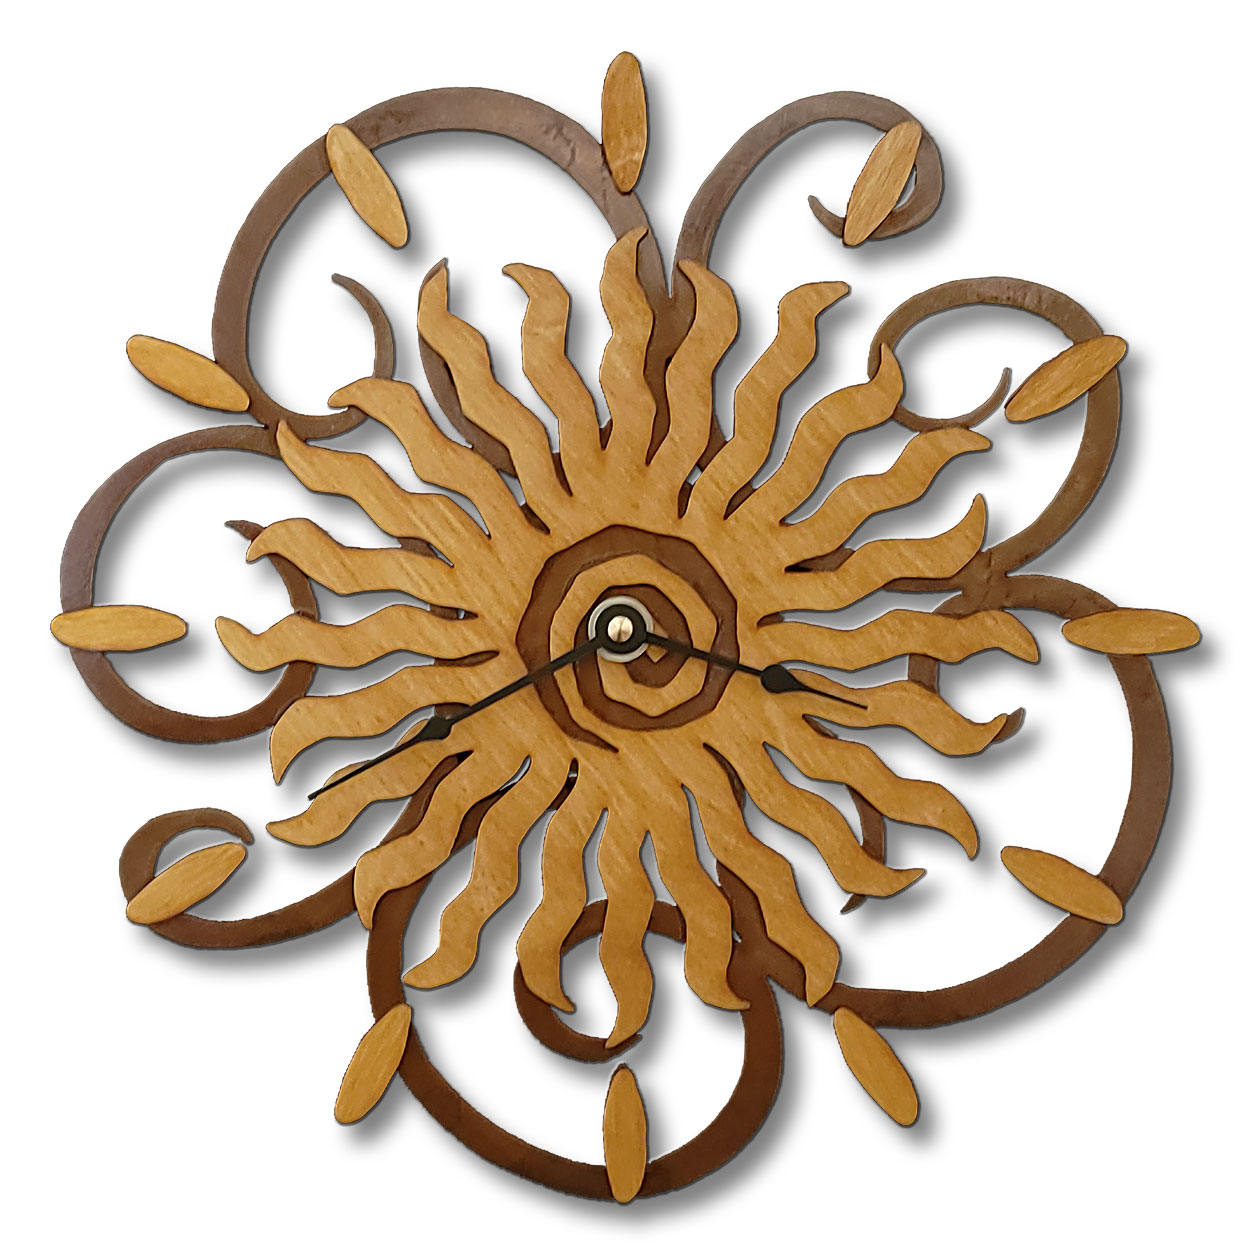 16642 - 24-Ray Sun Gold on Rust Wood and Metal Wall Clock - Choose 11.5 or 17.5in